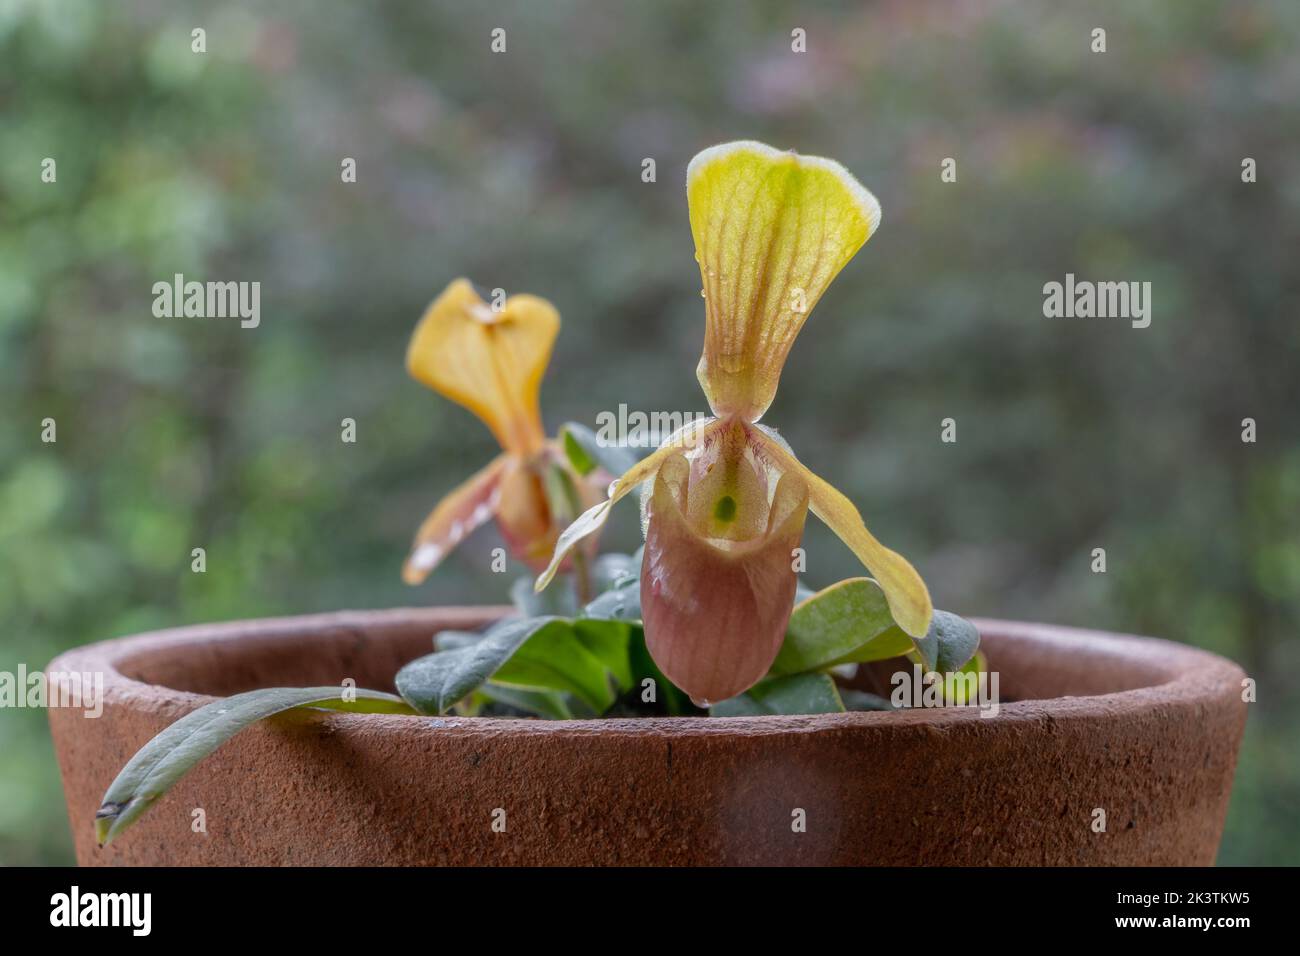 Closeup view of colorful lady slipper orchid species paphiopedilum helenae with yellow and orange red flowers isolated on natural background Stock Photo